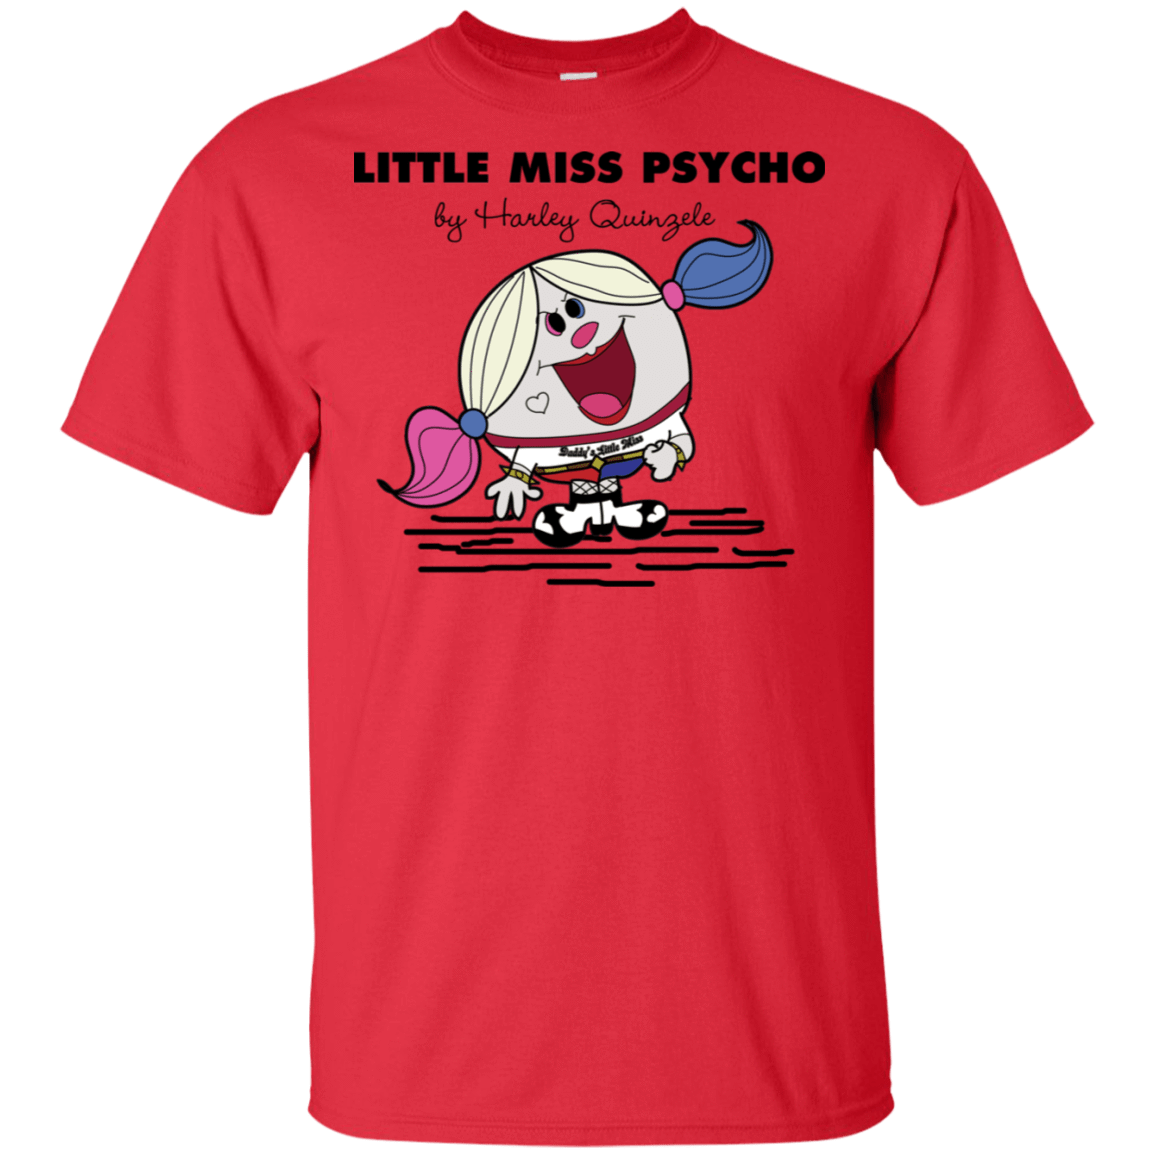 T-Shirts Red / S Little Miss Psycho T-Shirt